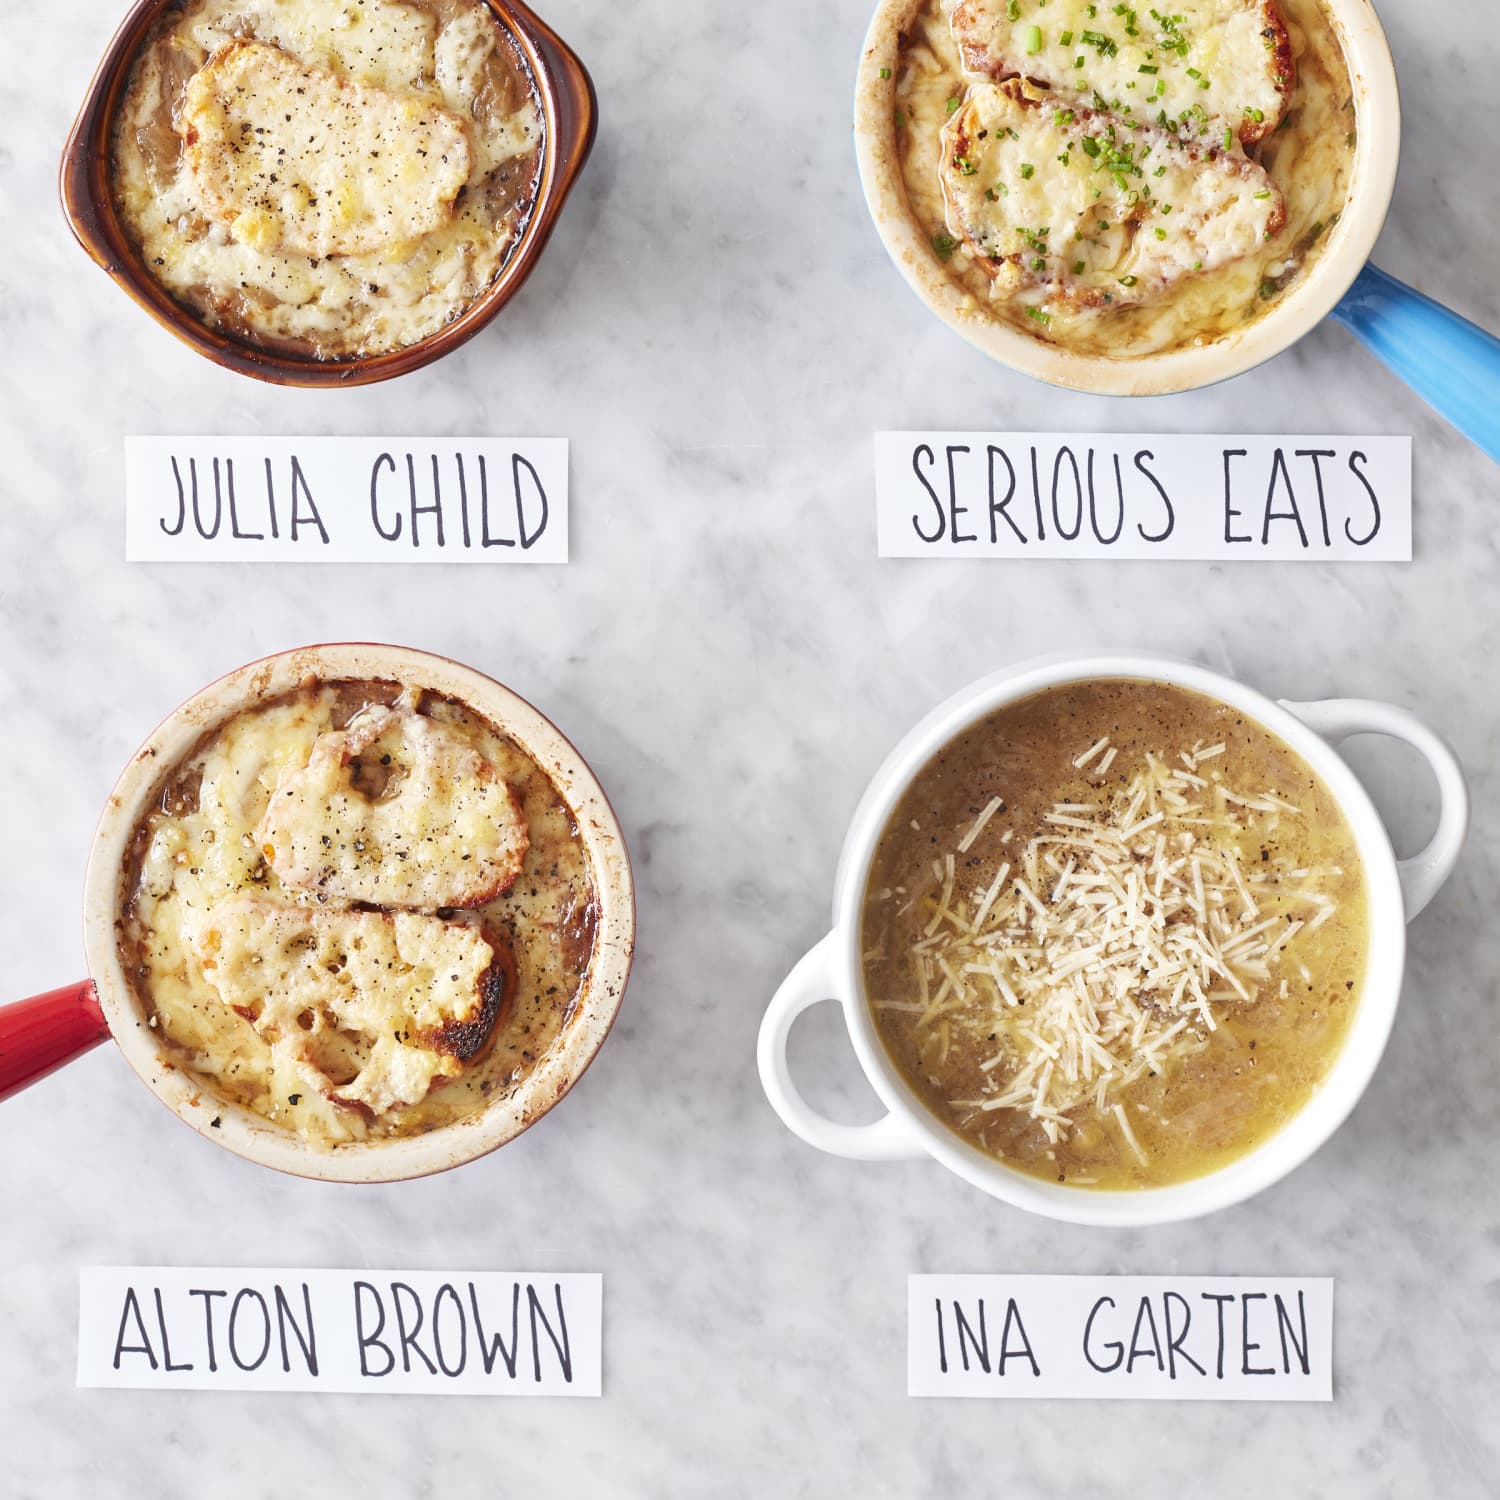 Onion soup variations